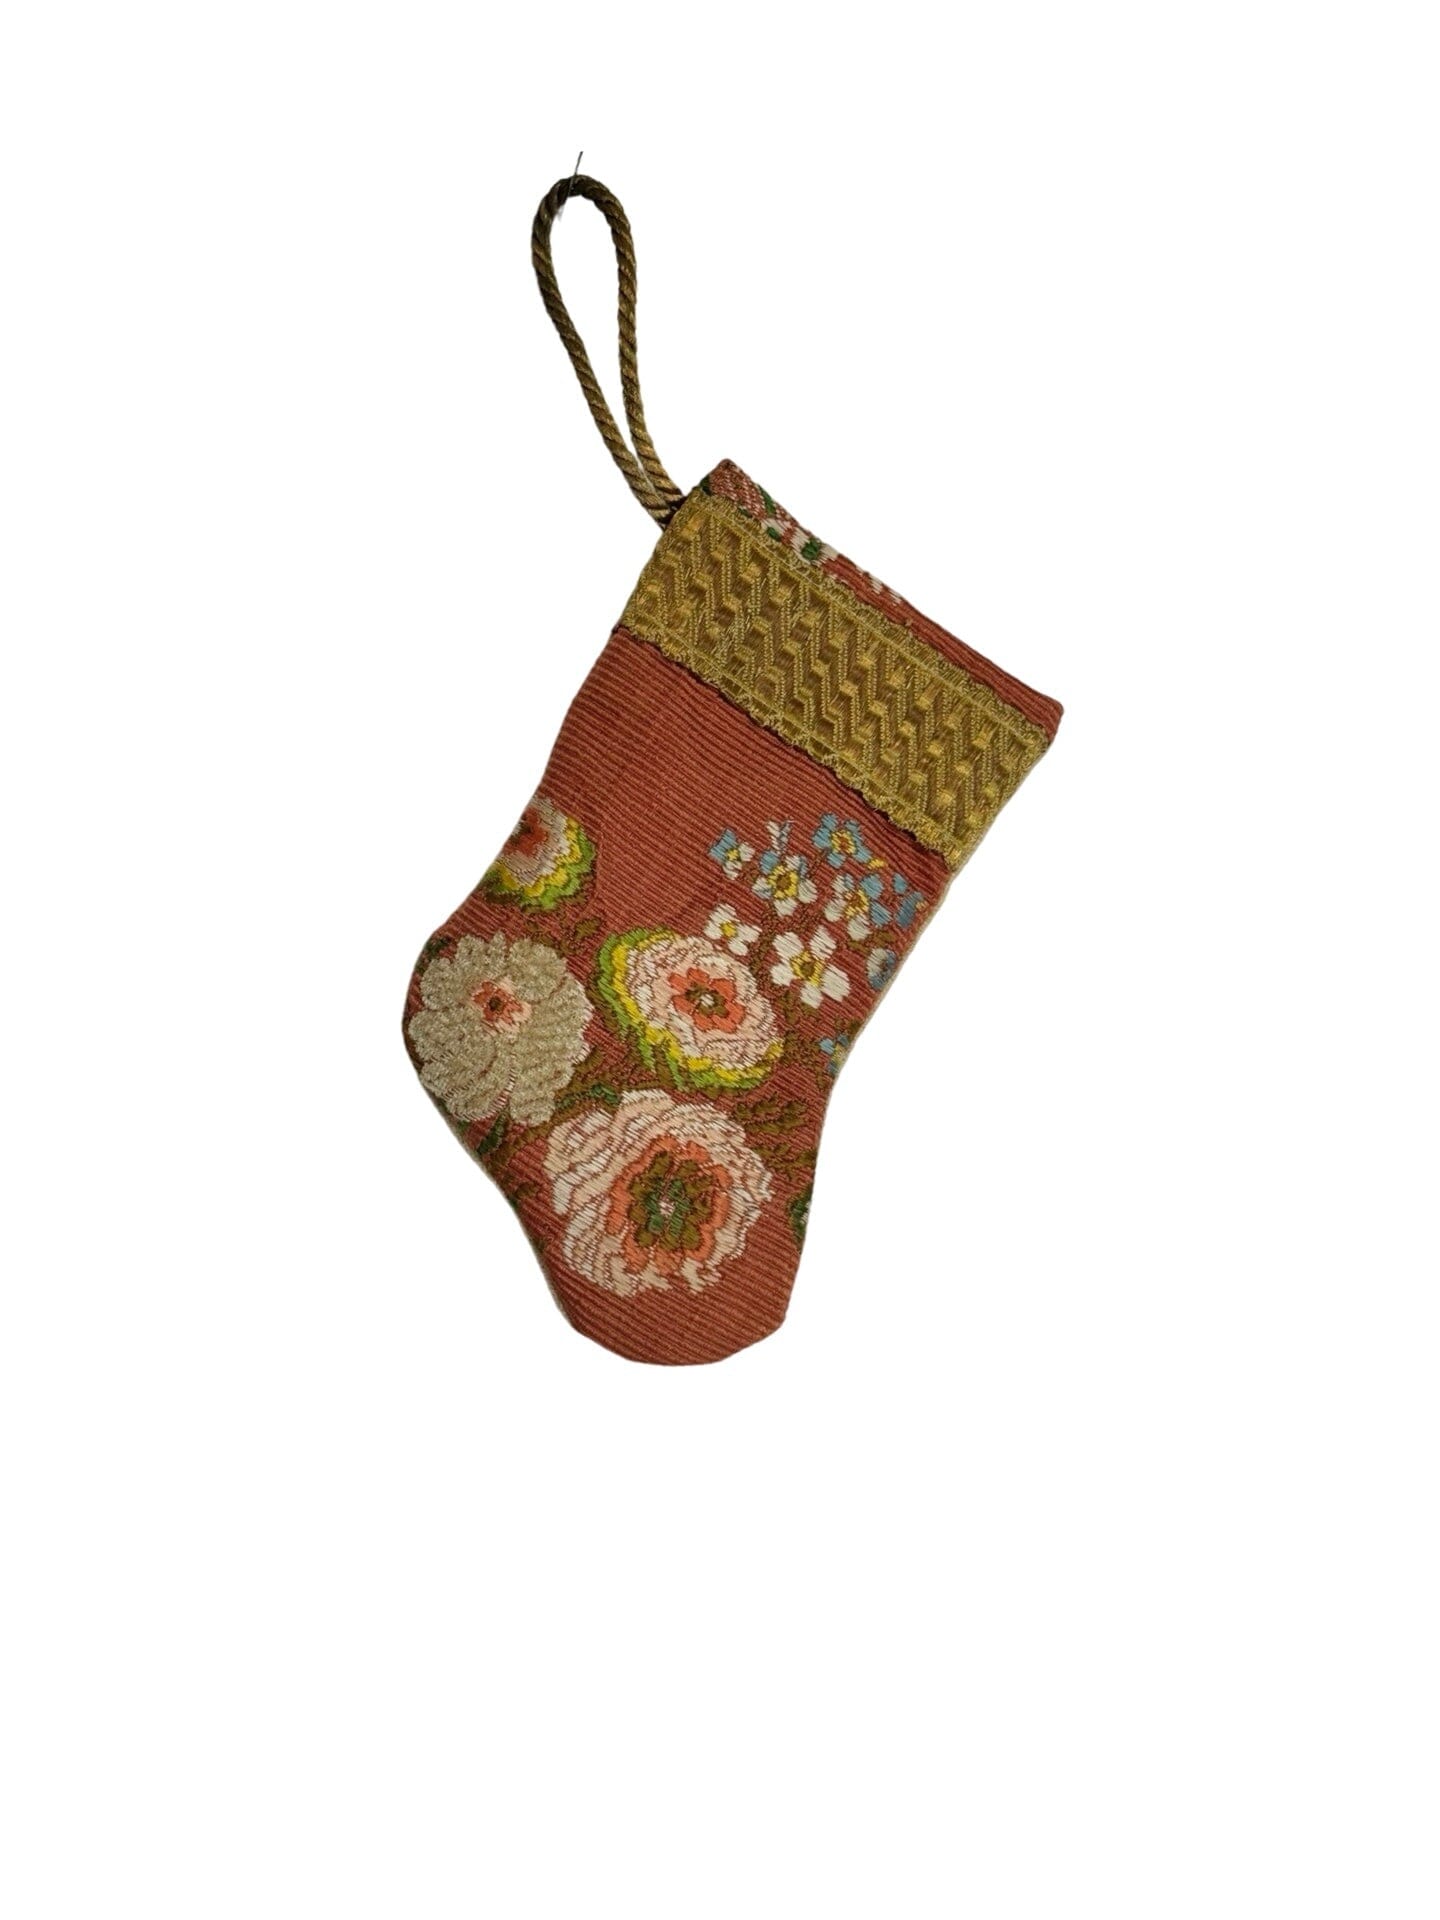 Handmade Mini Stocking Made From Vintage Fabric and Trims- Bronze Rose Floral Ornament B. Viz Design D 